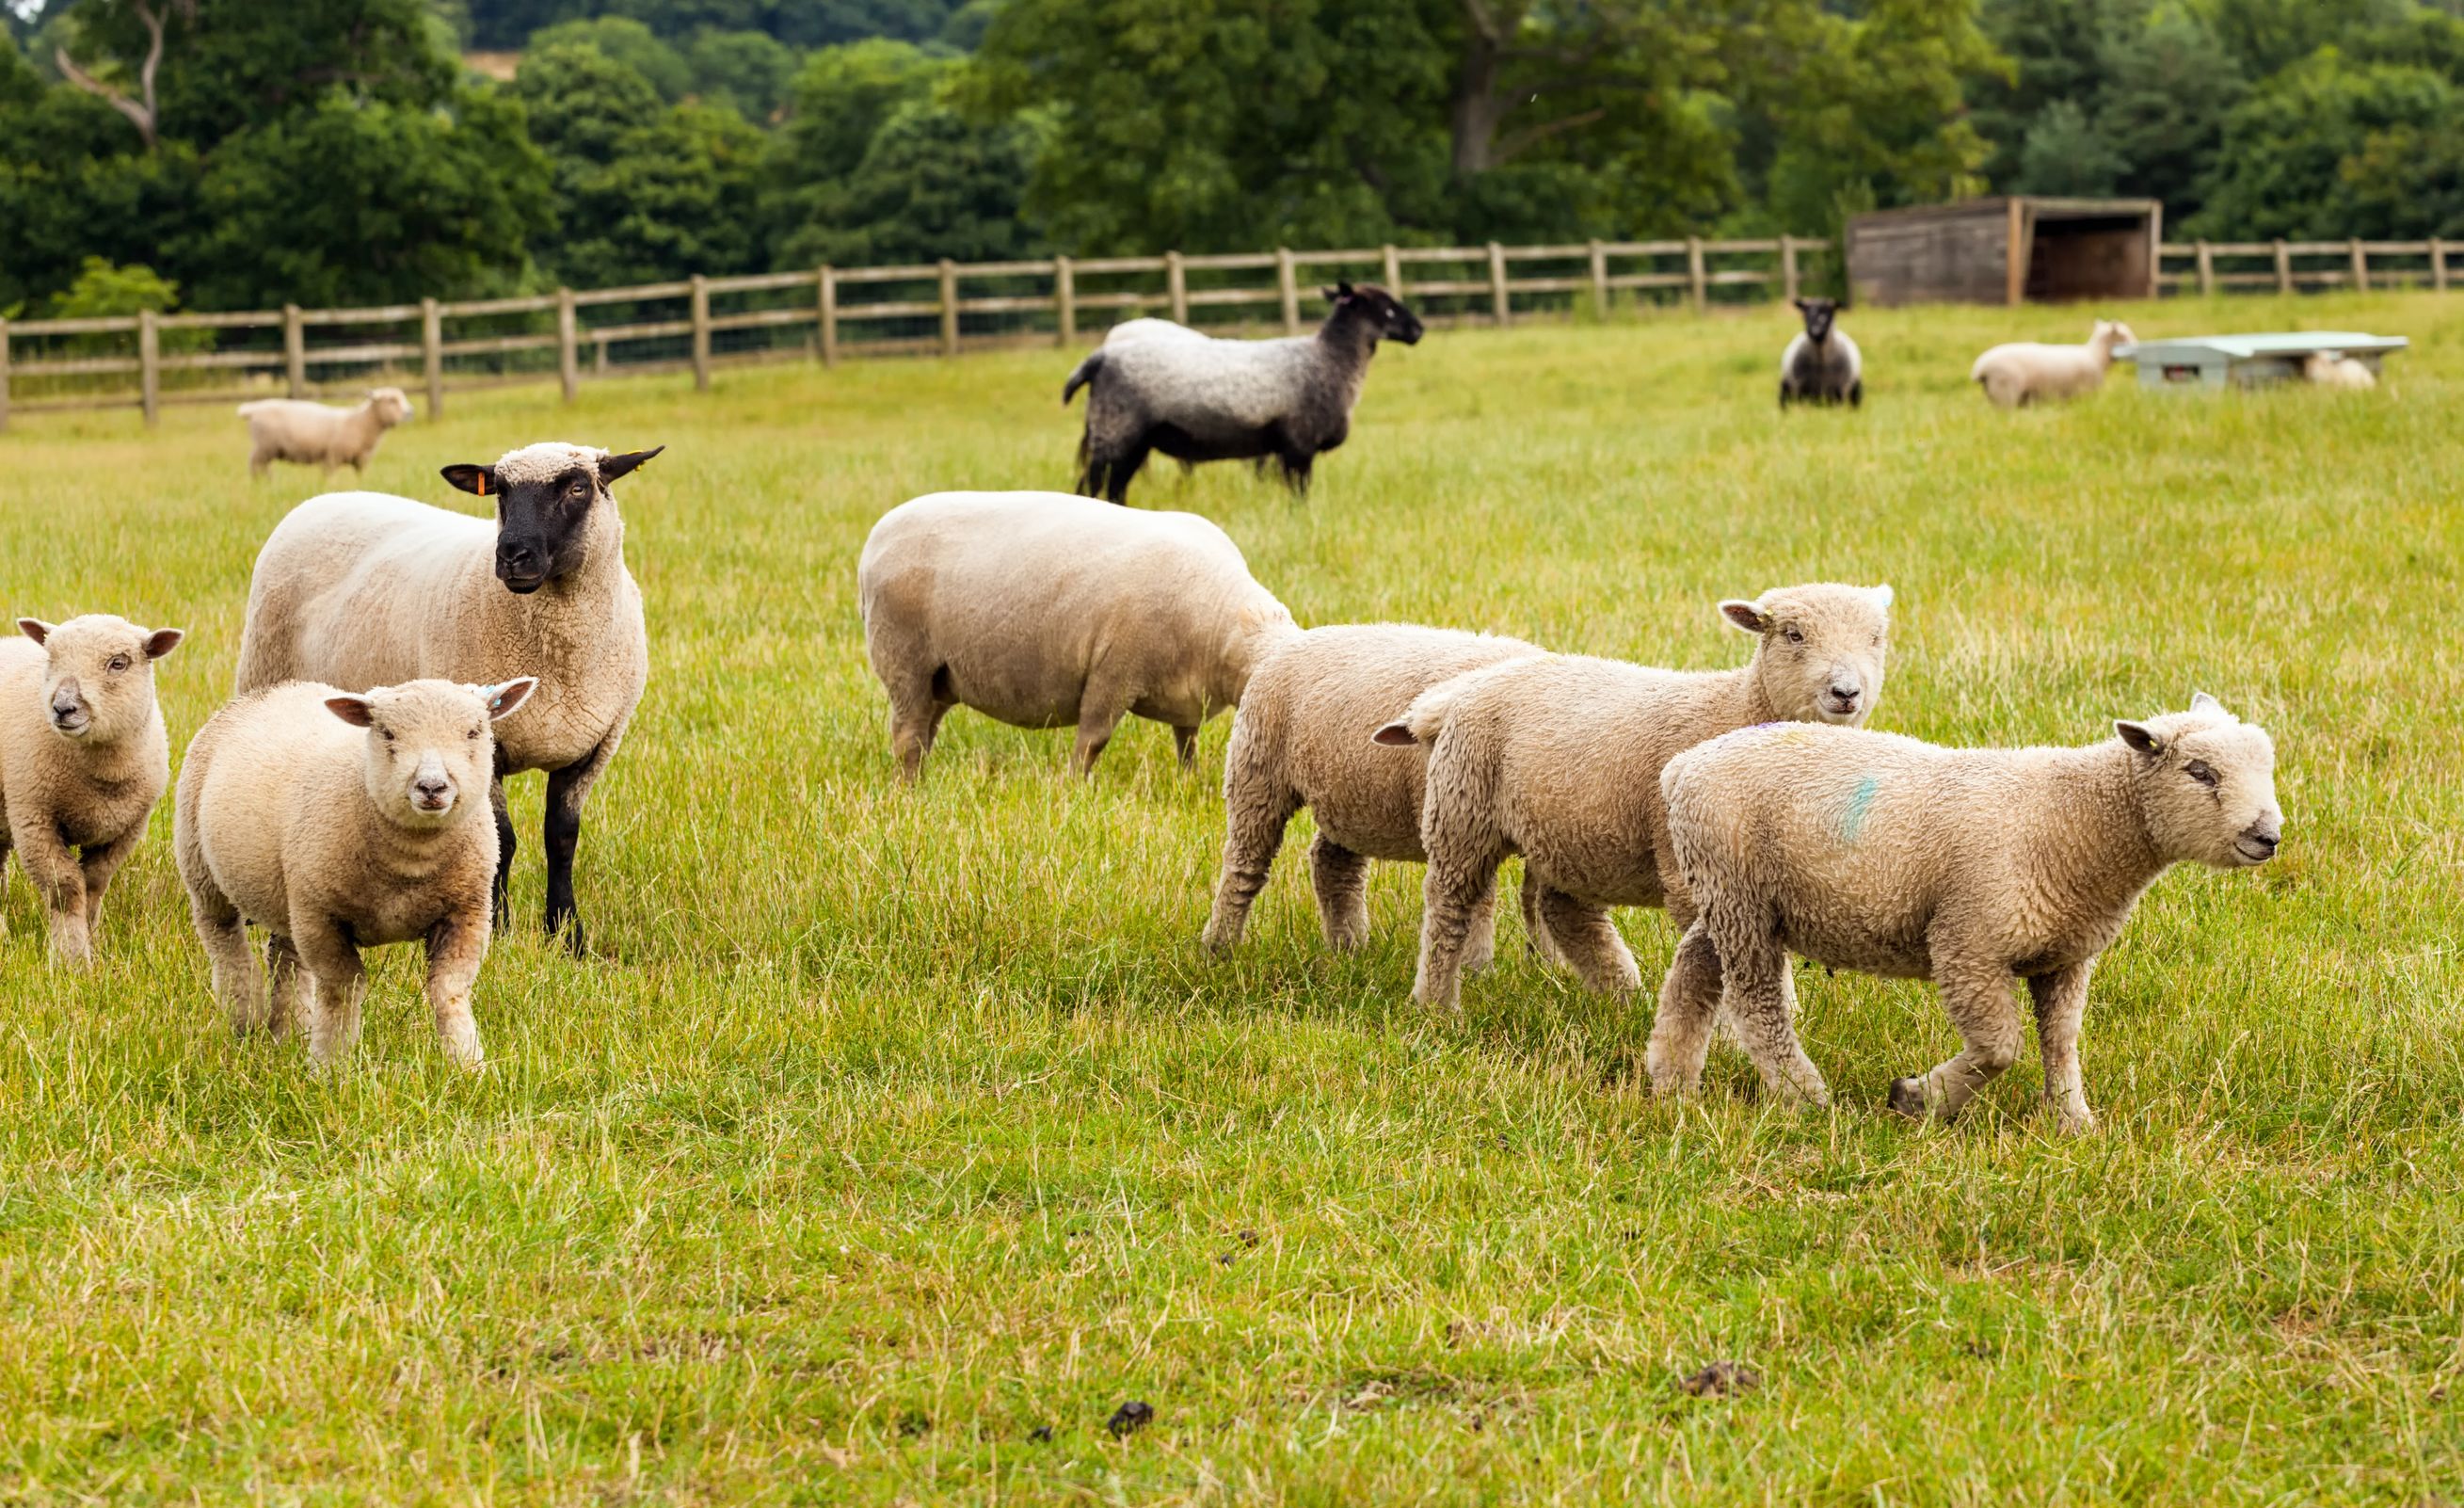 Pan-Wales ‘NVZ’ type regulations would be 'disastrous' for the Welsh livestock industry, farmers have warned